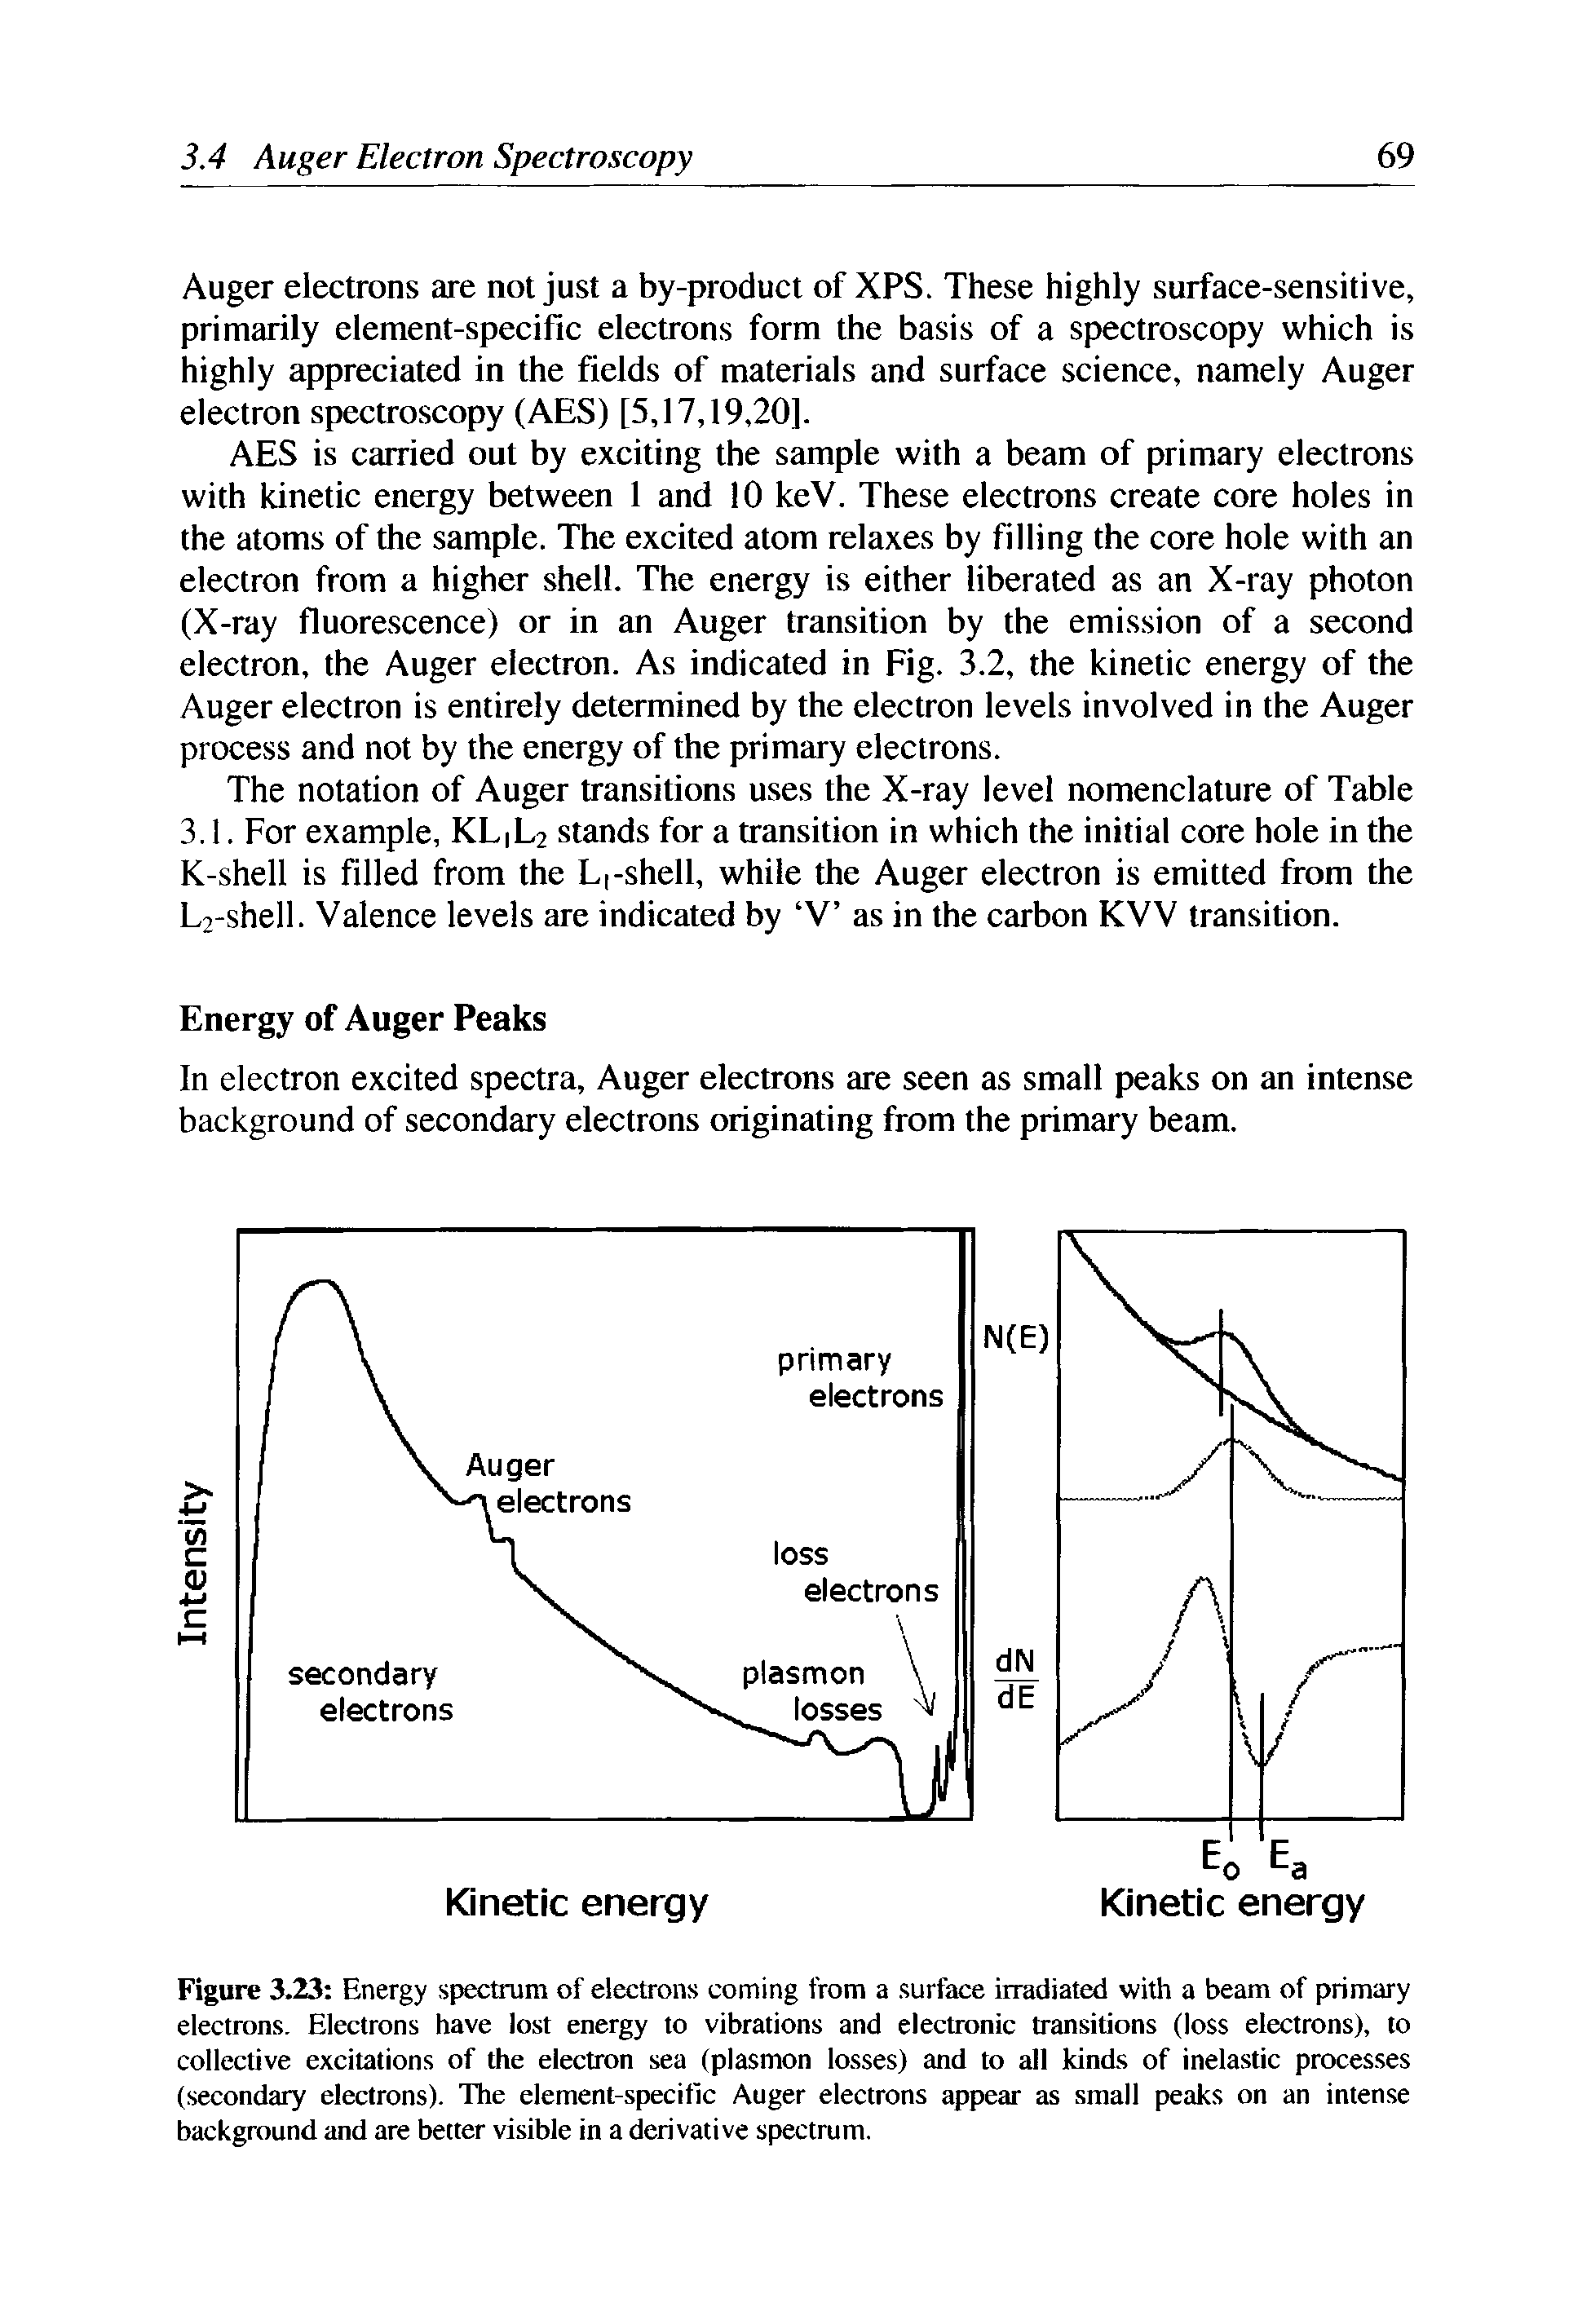 Figure 3.23 Energy spectrum of electrons coming from a surface irradiated with a beam of primary electrons. Electrons have lost energy to vibrations and electronic transitions (loss electrons), to collective excitations of the electron sea (plasmon losses) and to all kinds of inelastic processes (secondary electrons). The element-specific Auger electrons appear as small peaks on an intense background and are better visible in a derivative spectrum.